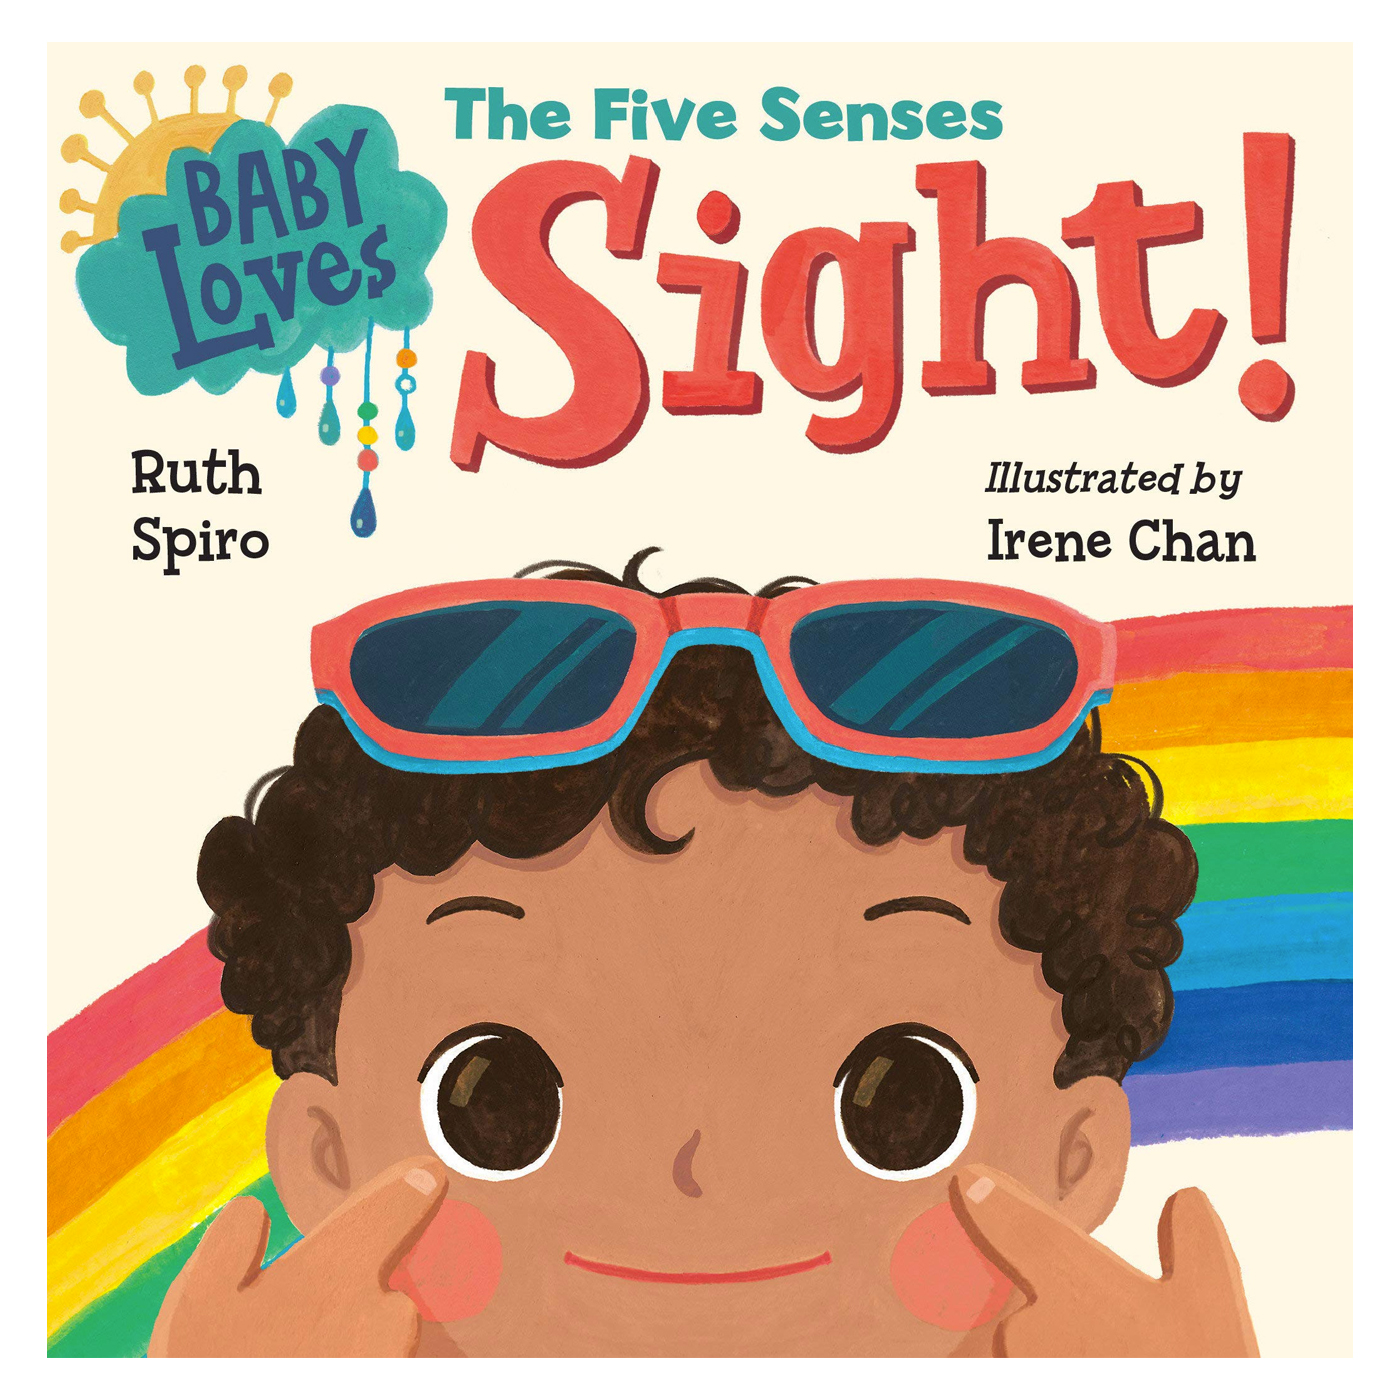  Baby Loves the Five Senses: Sight